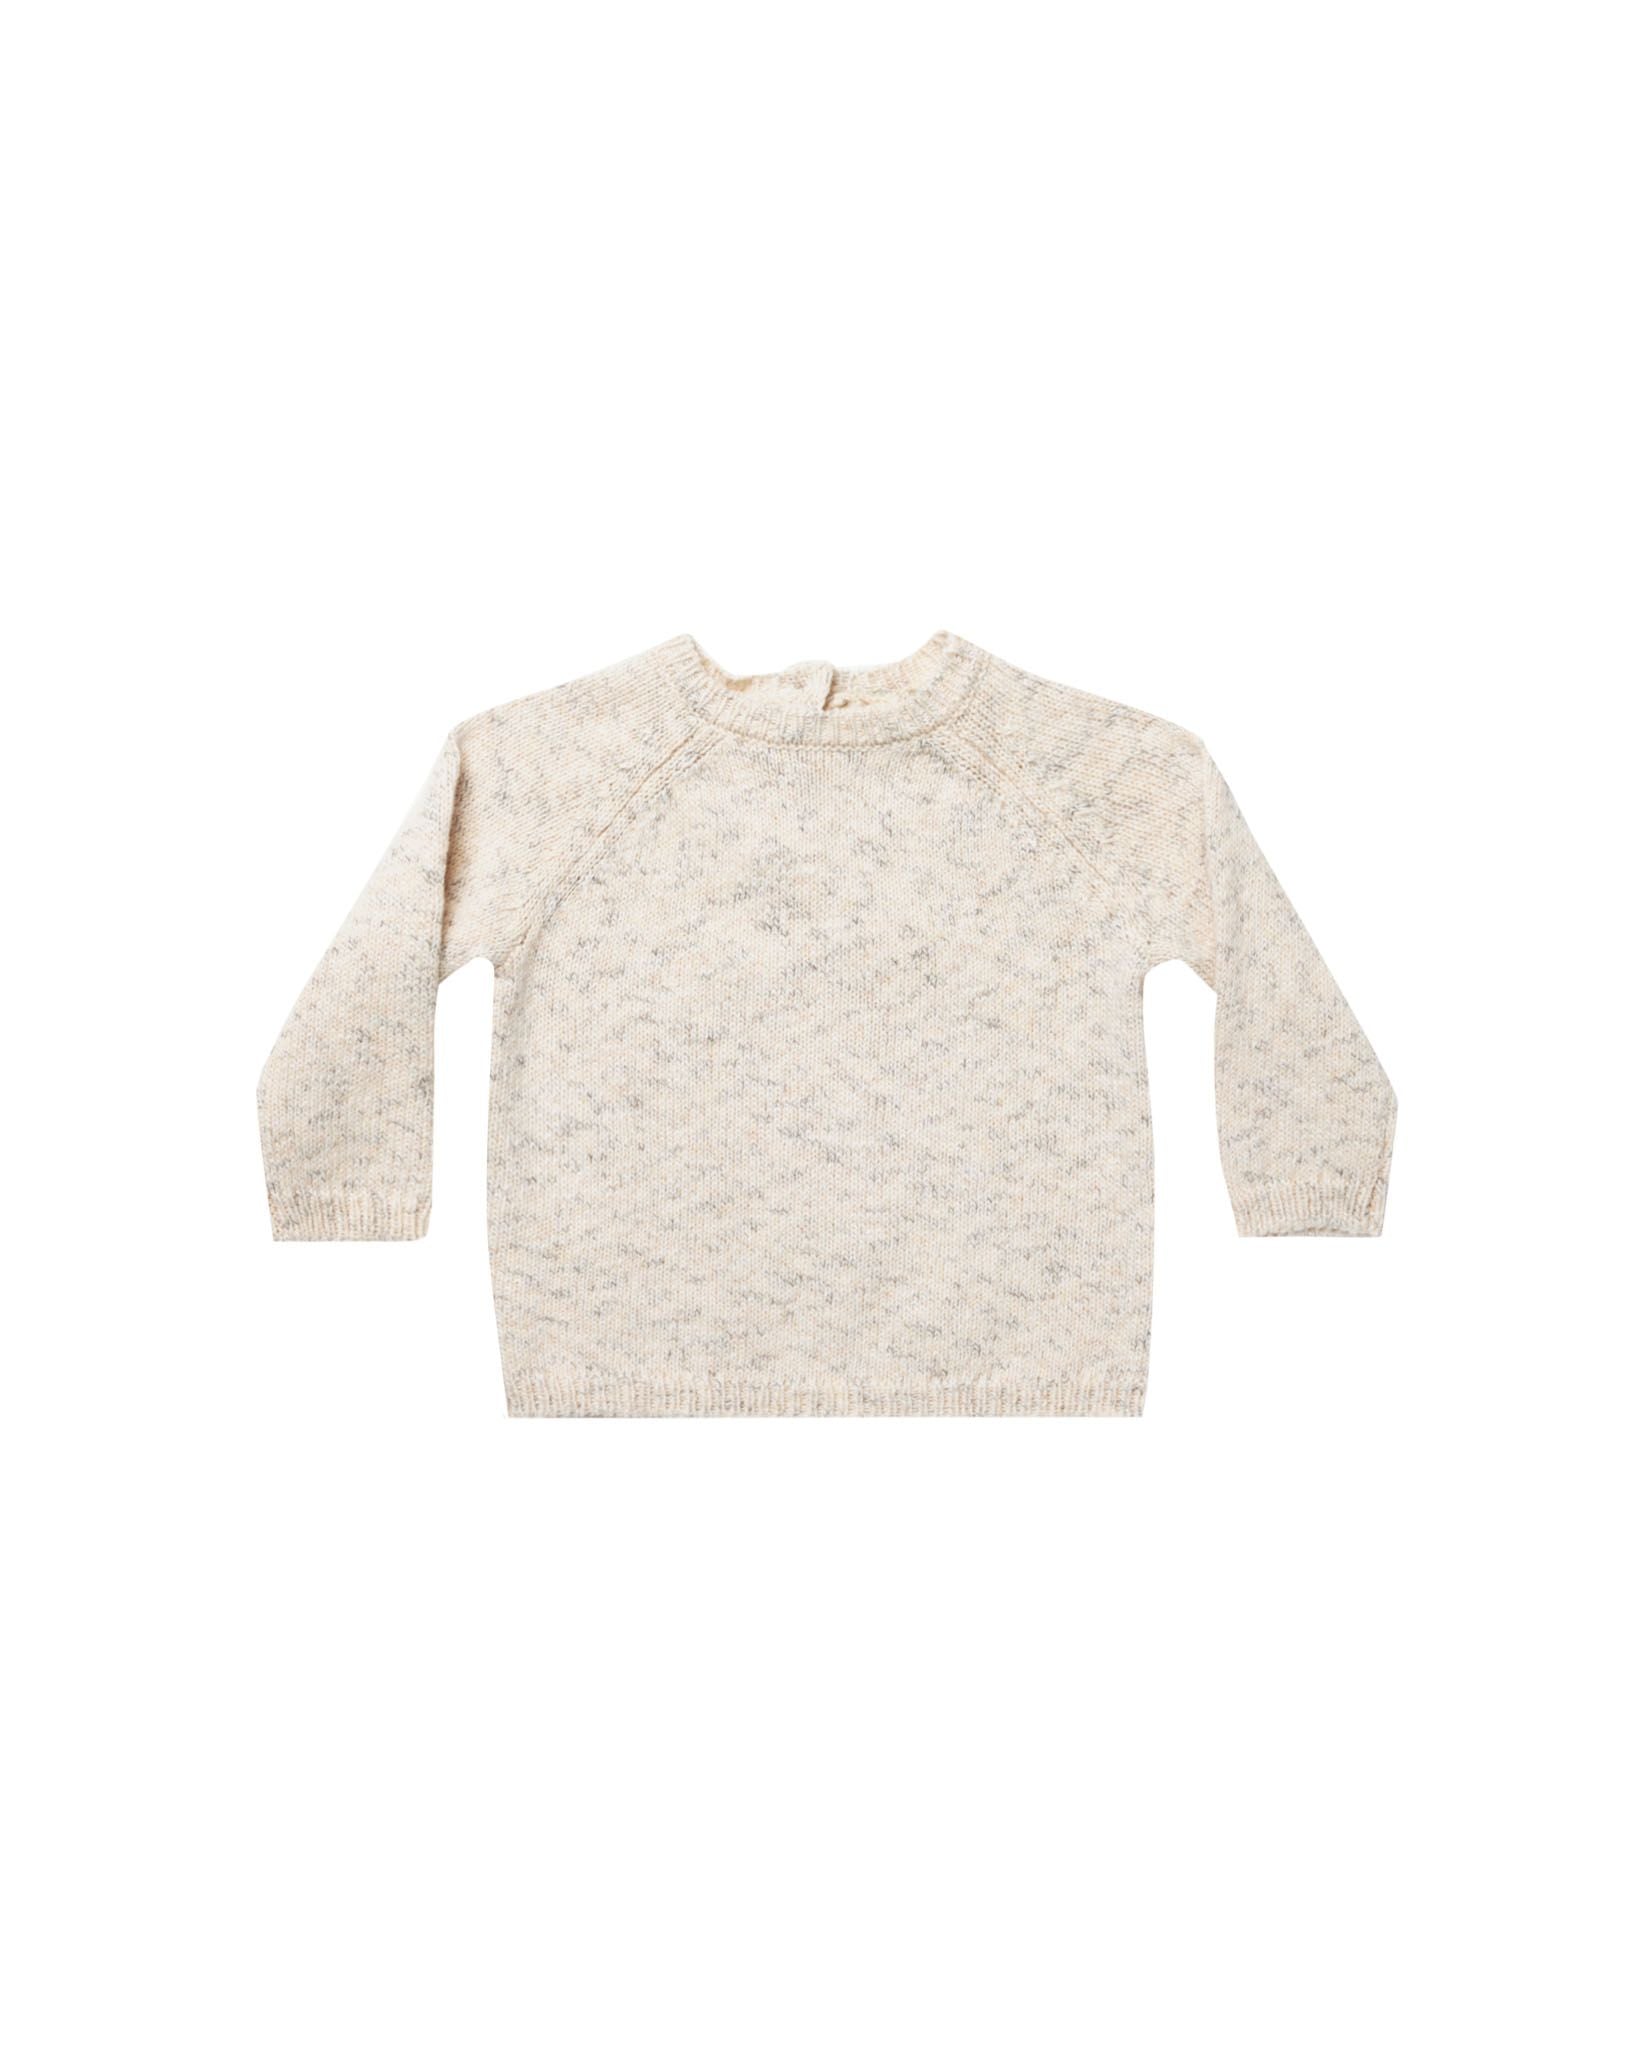 Speckled Knit Sweater - Natural